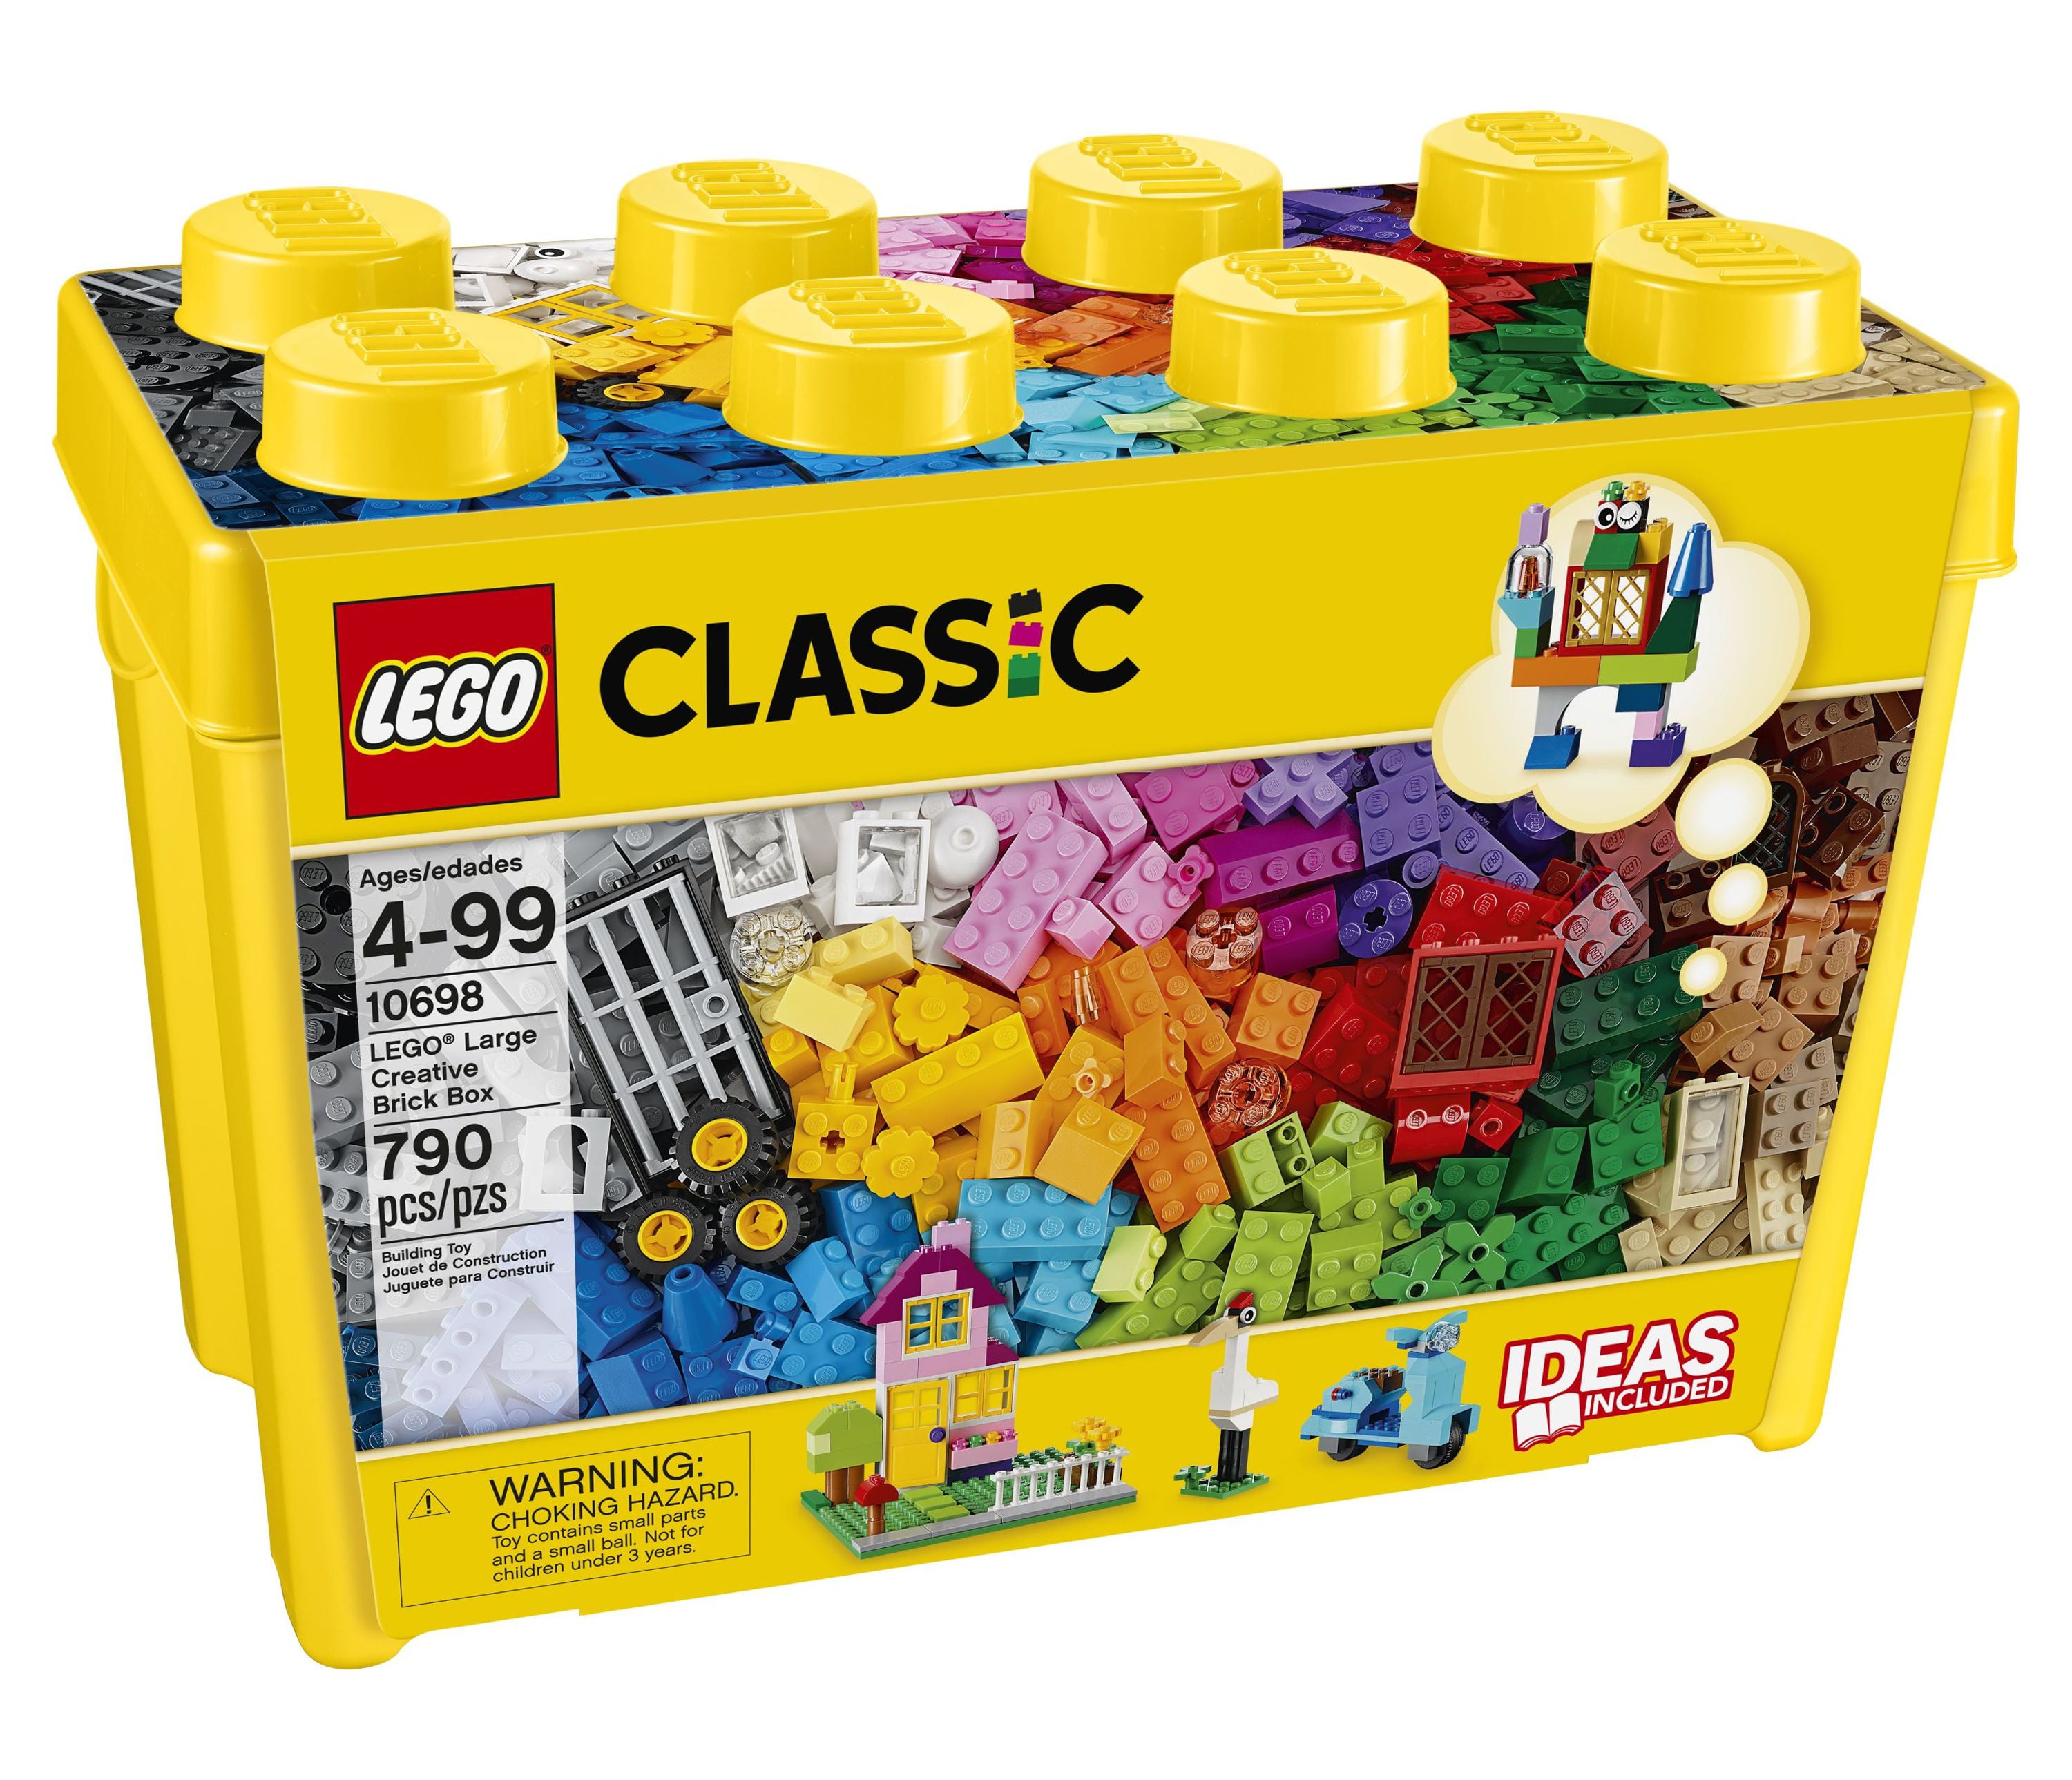 LEGO Classic Large Creative Brick Box 10698 Play and Be Inspired by LEGO Masters, Toy Storage Solution for Home or Classrooms, Interactive Building Toy for Kids, Boys, and Girls - image 3 of 6